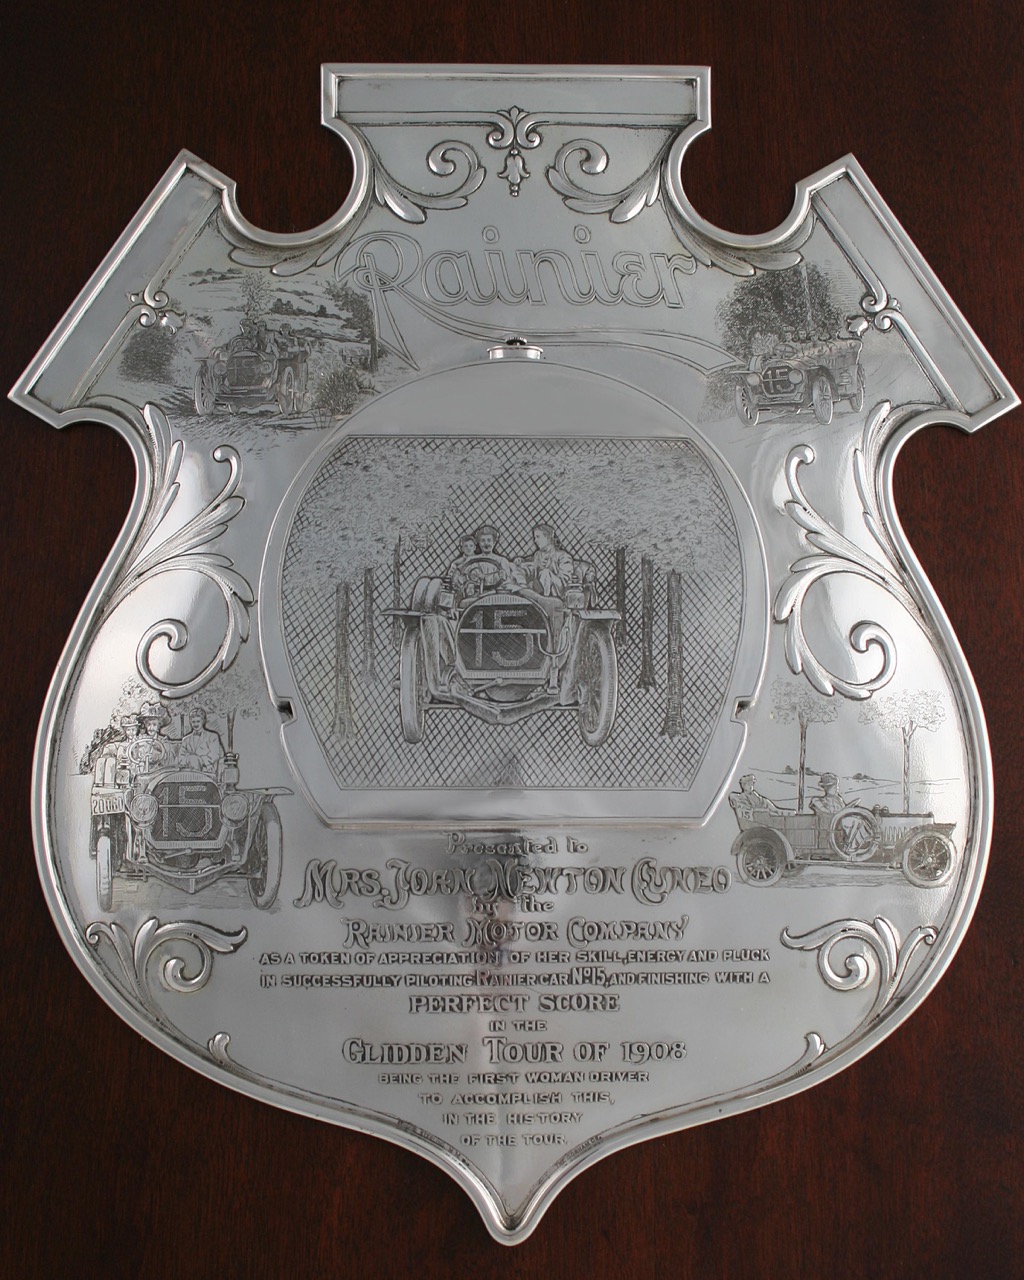 Rainer Motor Co. silver plaque awarded for perfect score in 1908 Gladden tour